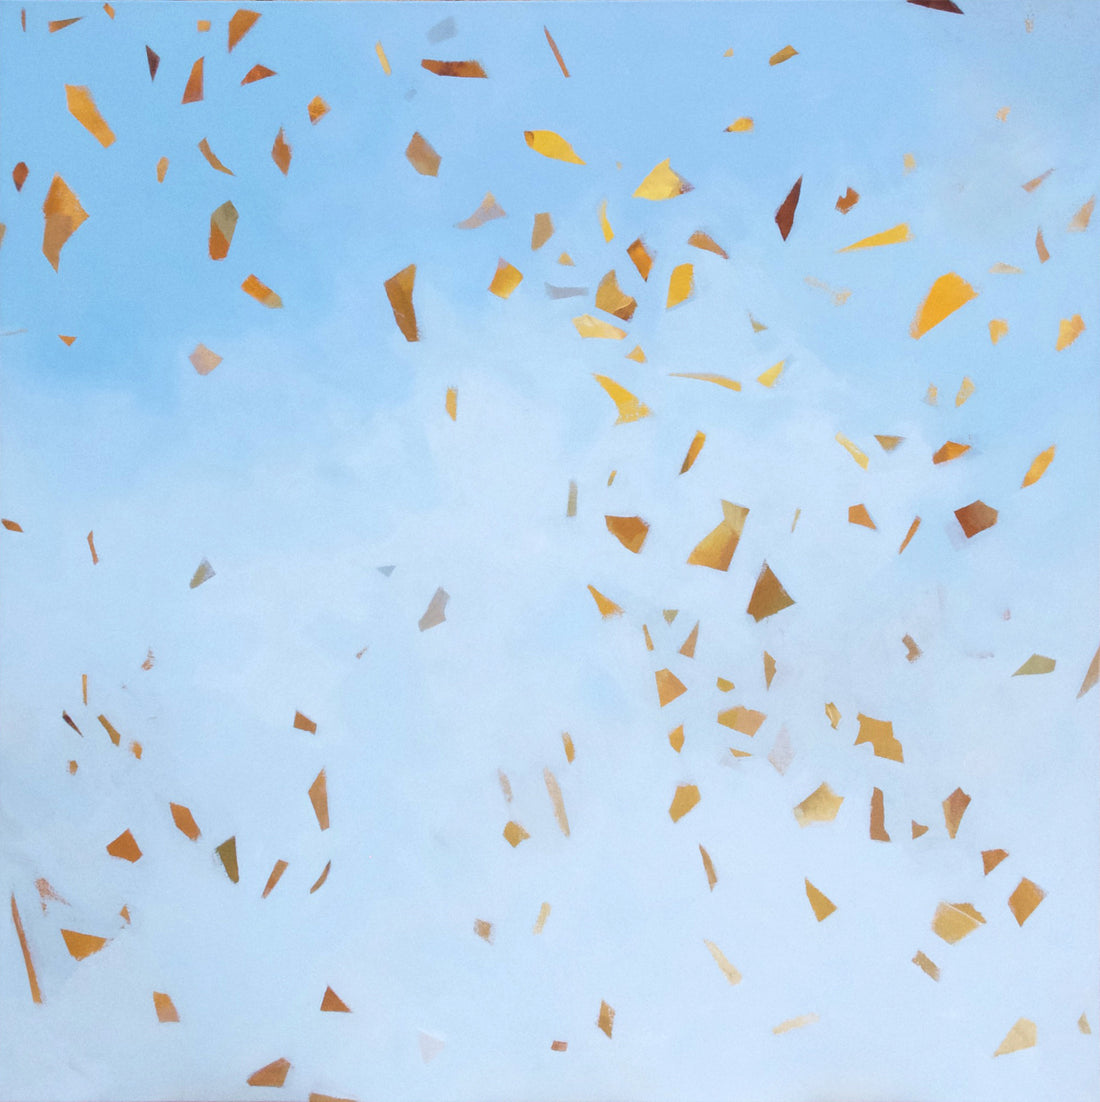 Gold abstract confetti on blue sky background